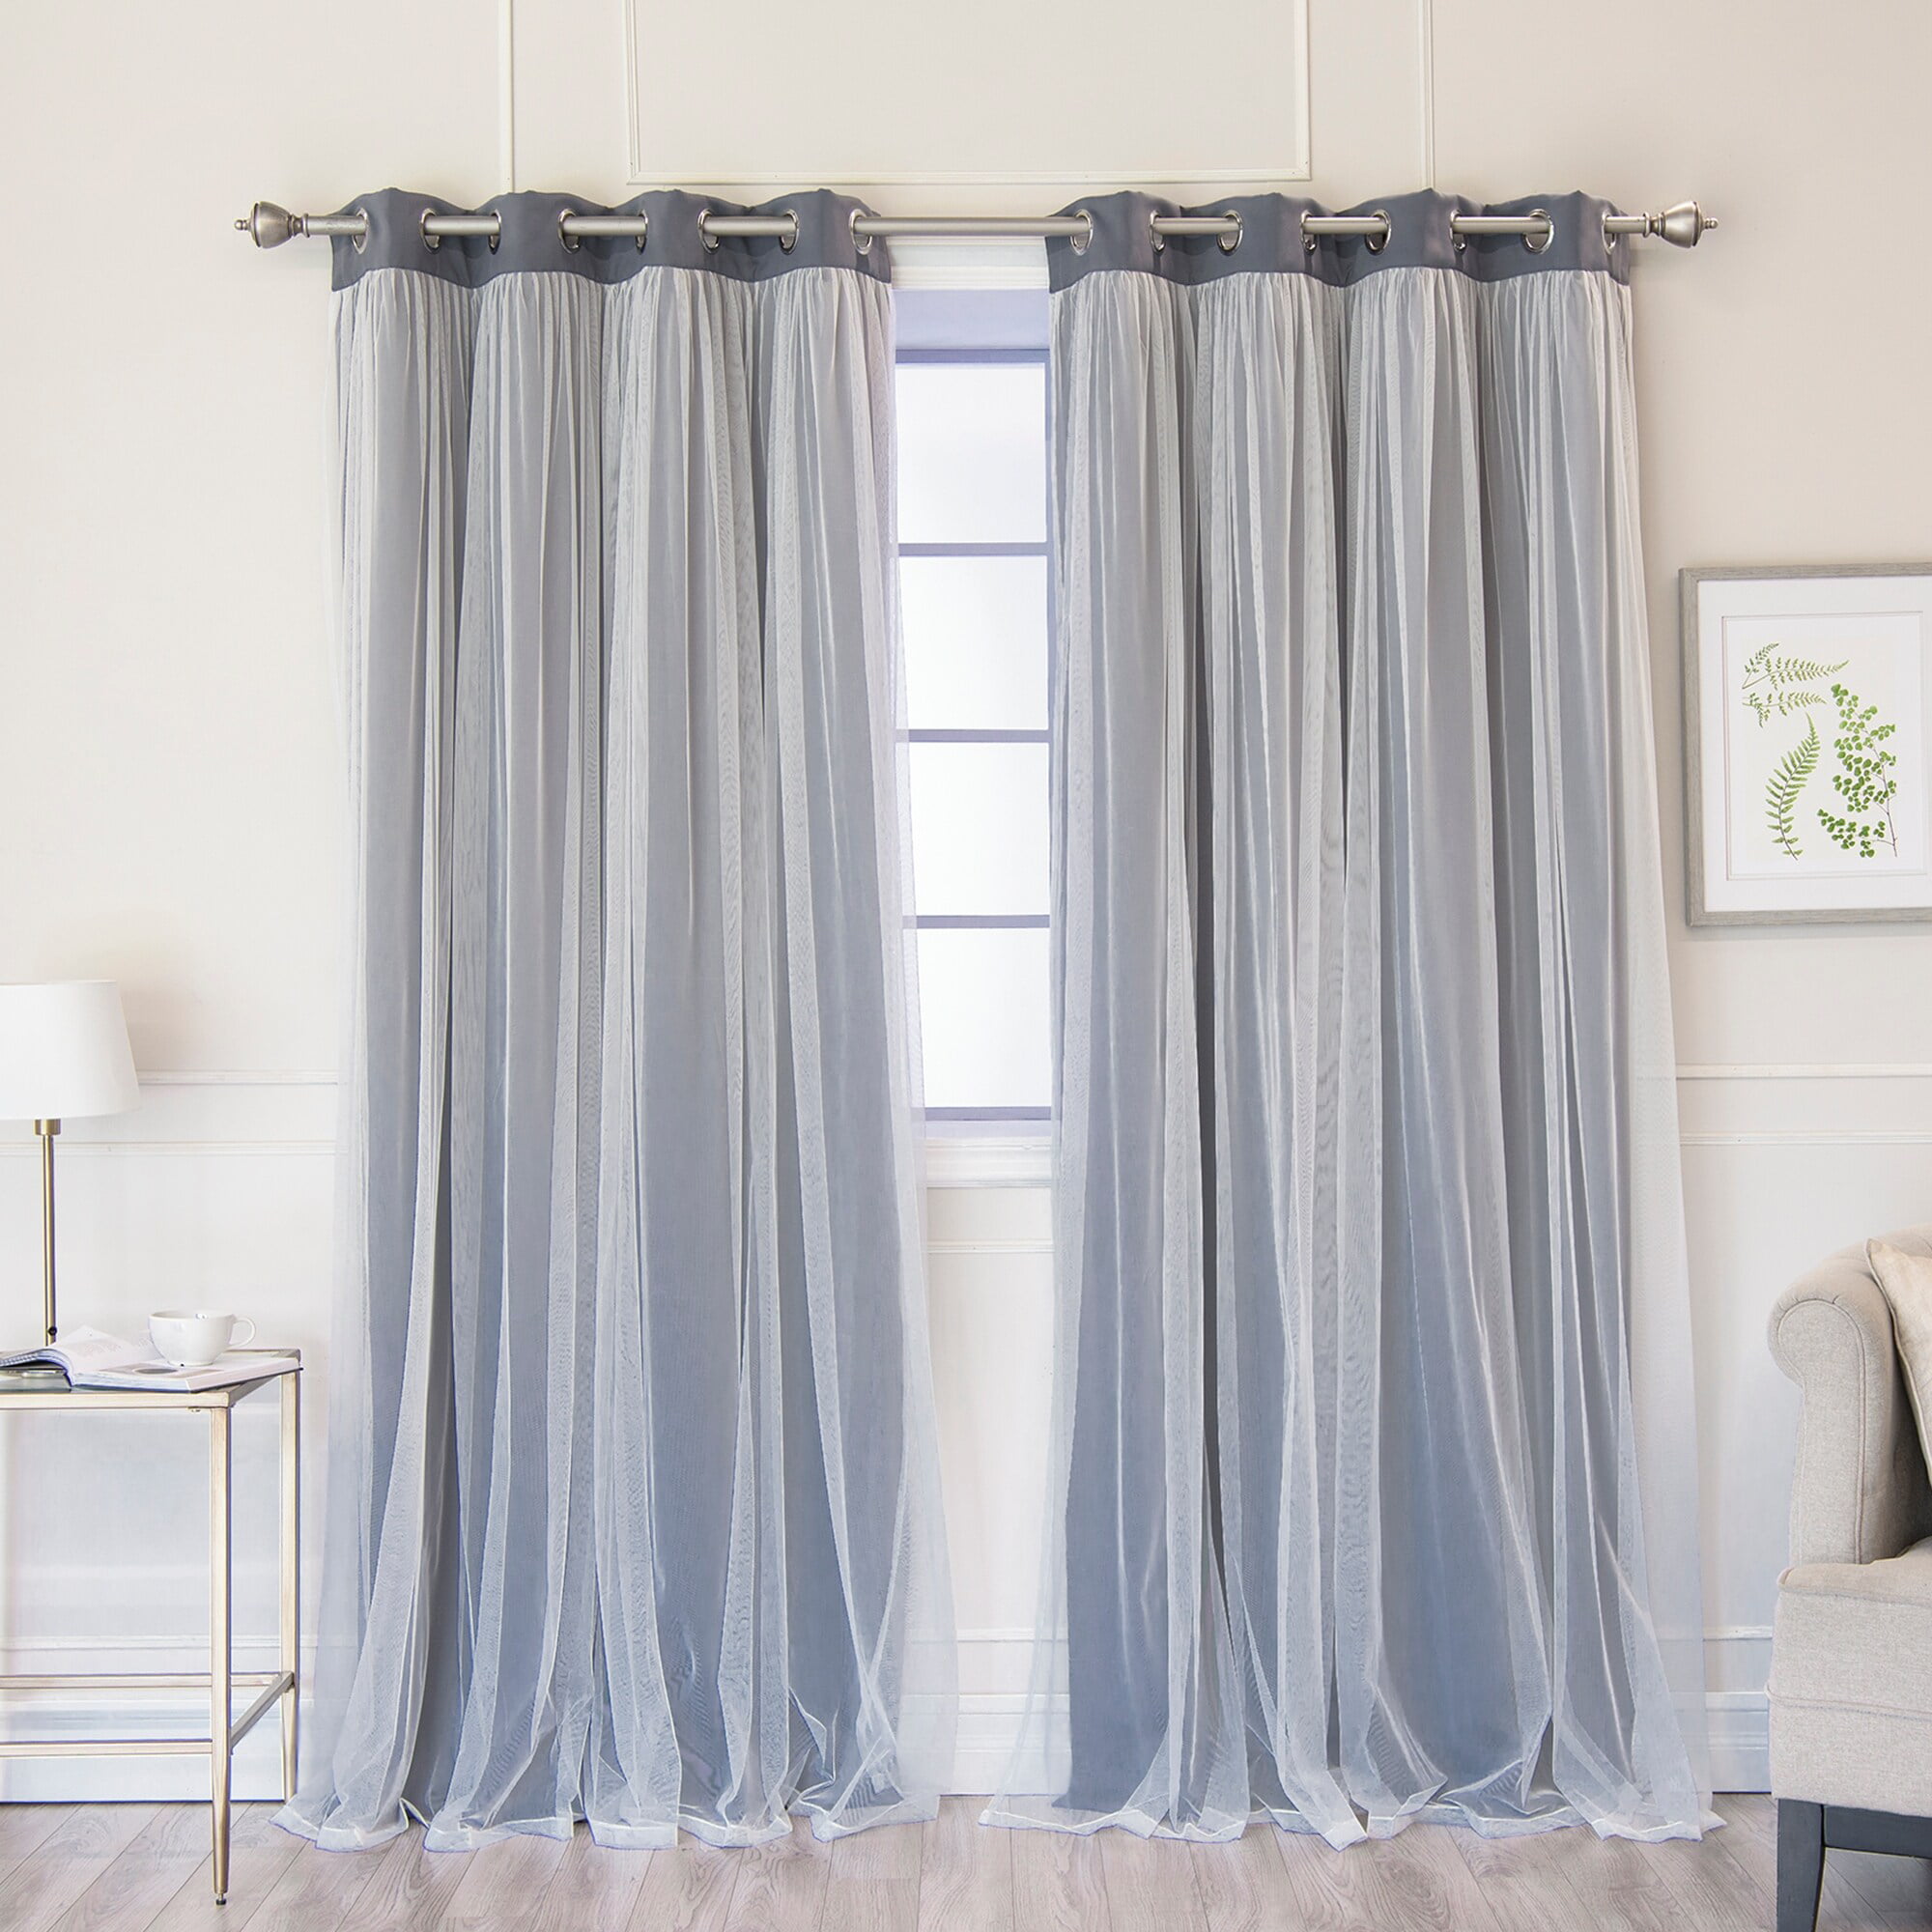 Aurora Home Star Punch Tulle Overlay Blackout Curtain Panel Pair 